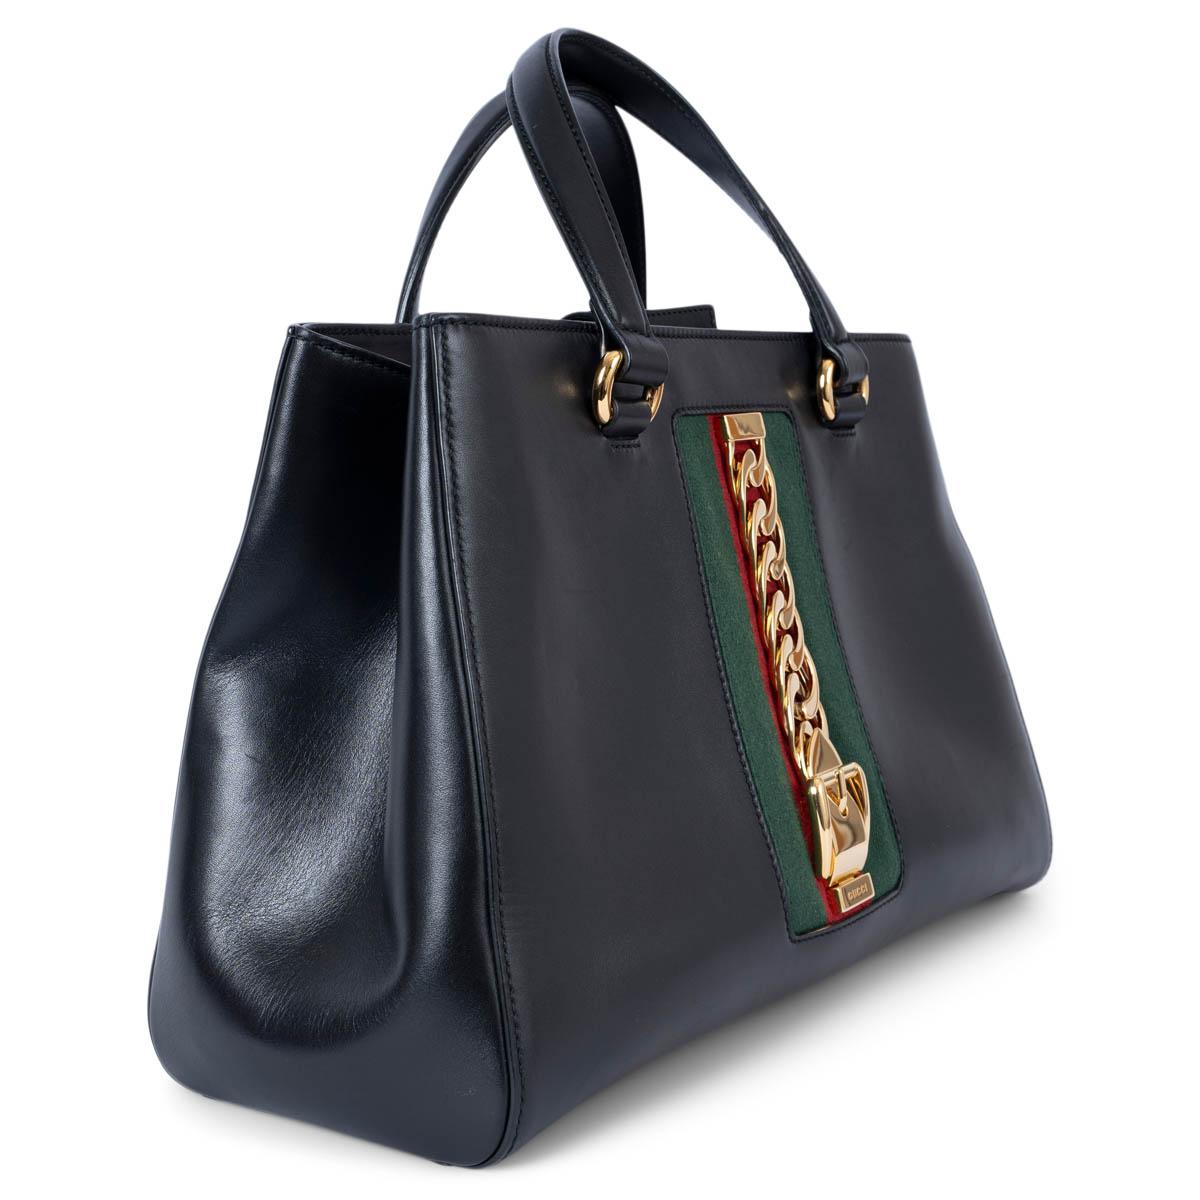 100% authentic Gucci Large Sylvie top handle tote bag in smooth black leather with green and red classic Web on the front embellished with gold-tone metal buckle chain detail. Opens with a magnetic button and is lined in beige suede with a large